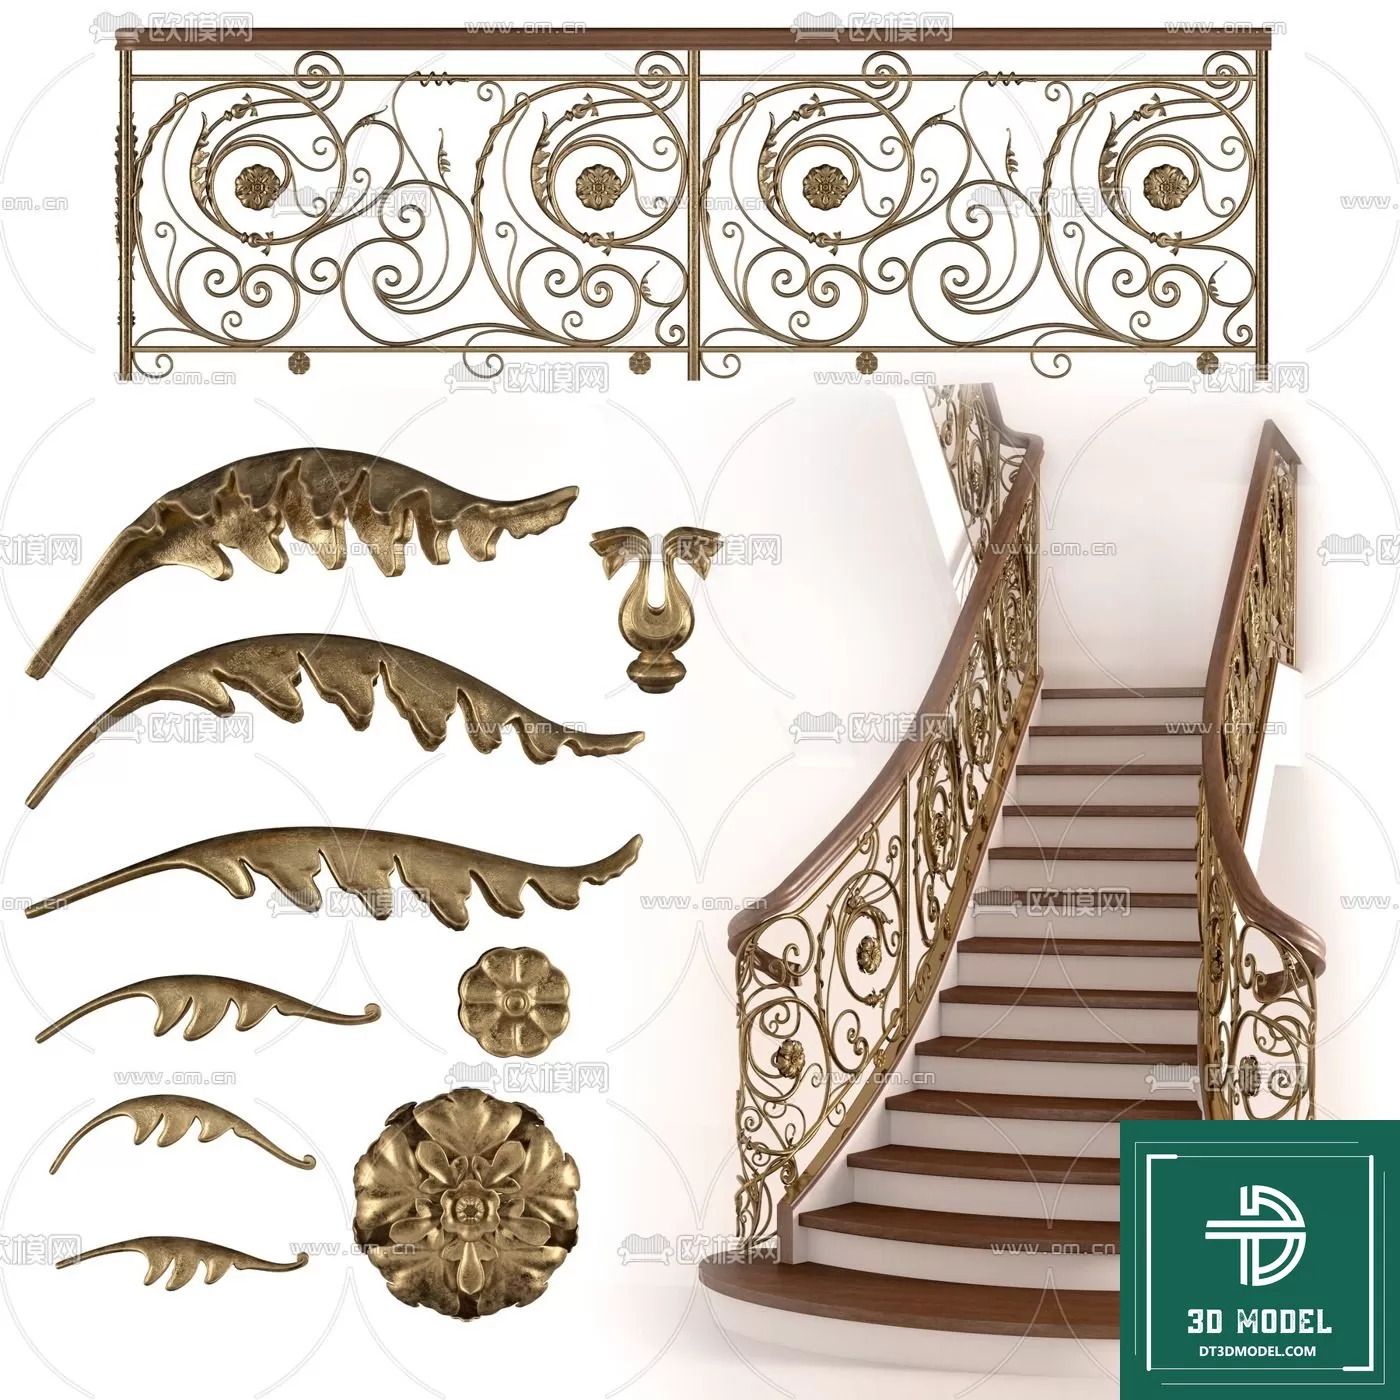 STAIR – 3DS MAX MODELS – 010 – PRO